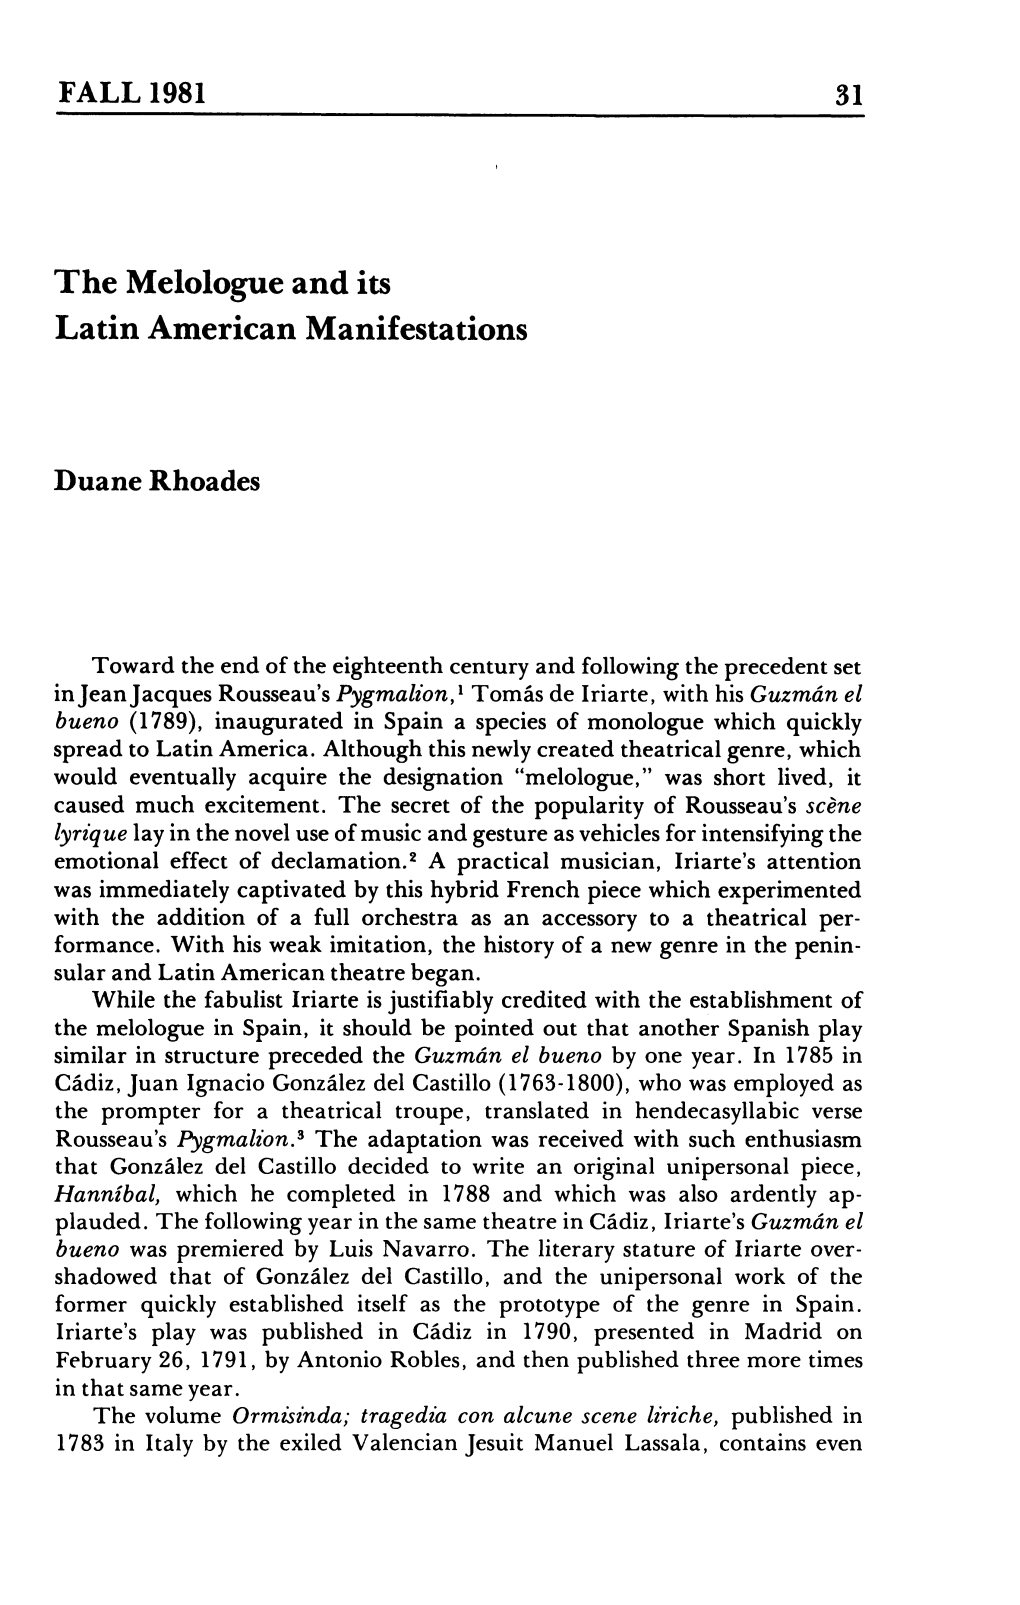 The Melologue and Its Latin American Manifestations